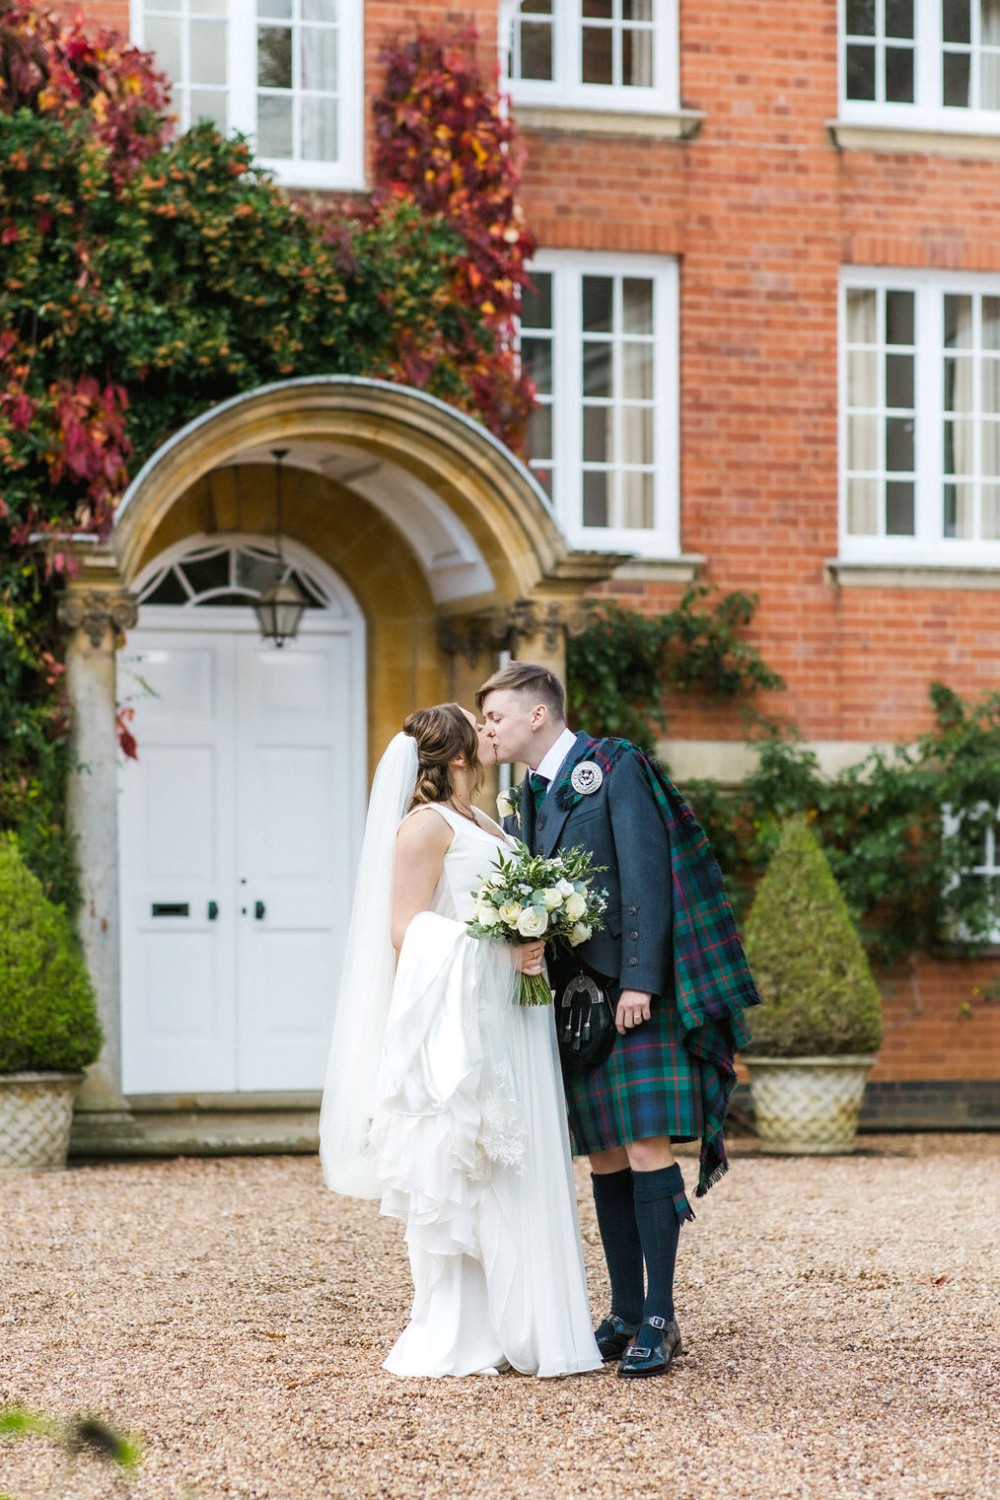 A bride and groom kissing in front of a red brick house.